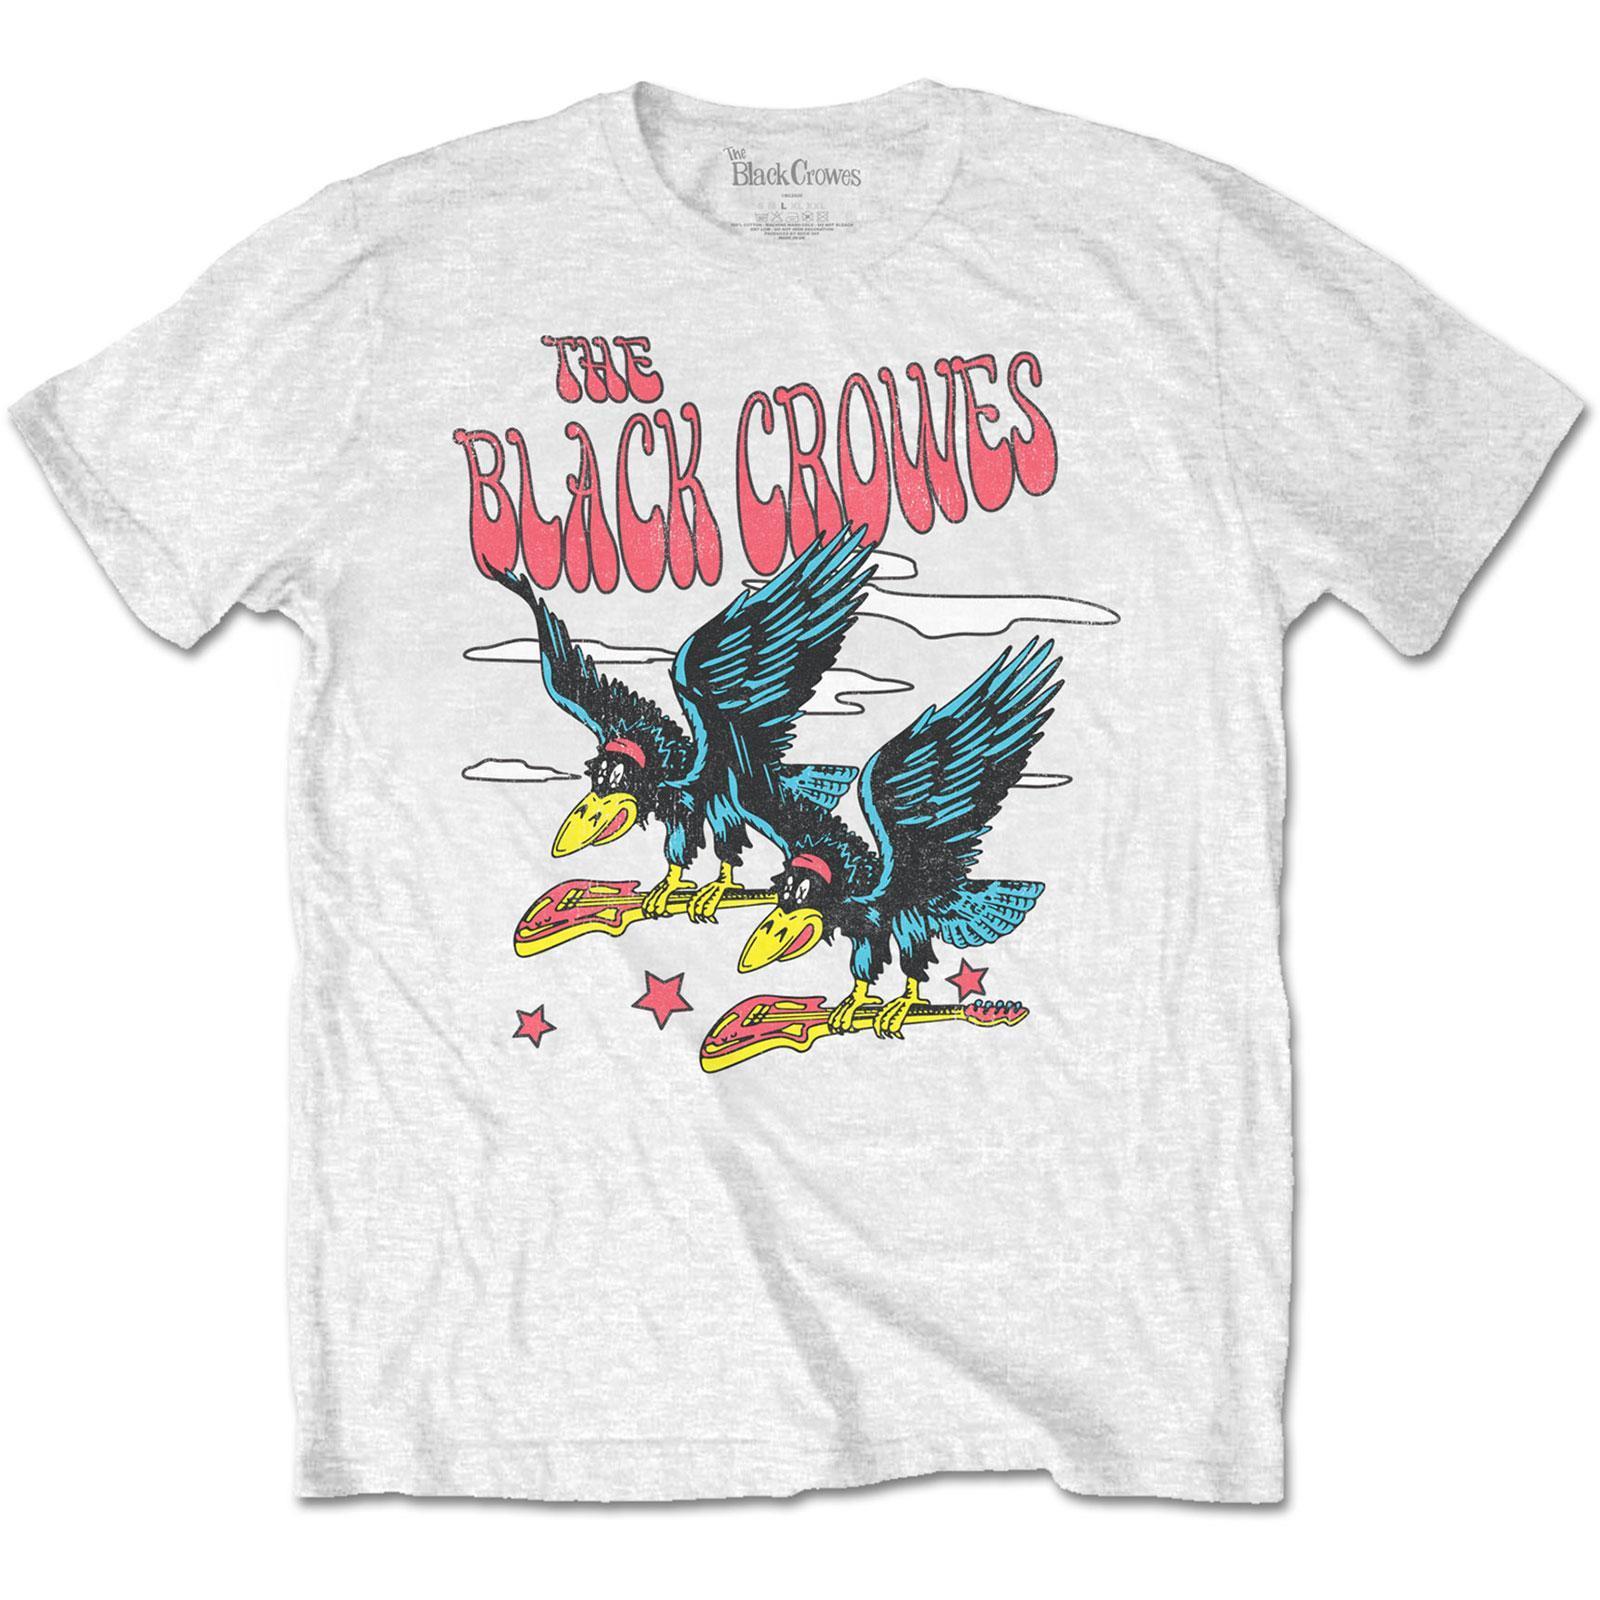 The Black Crowes Unisex Adult Flying Crowes T-Shirt (White) (XL)